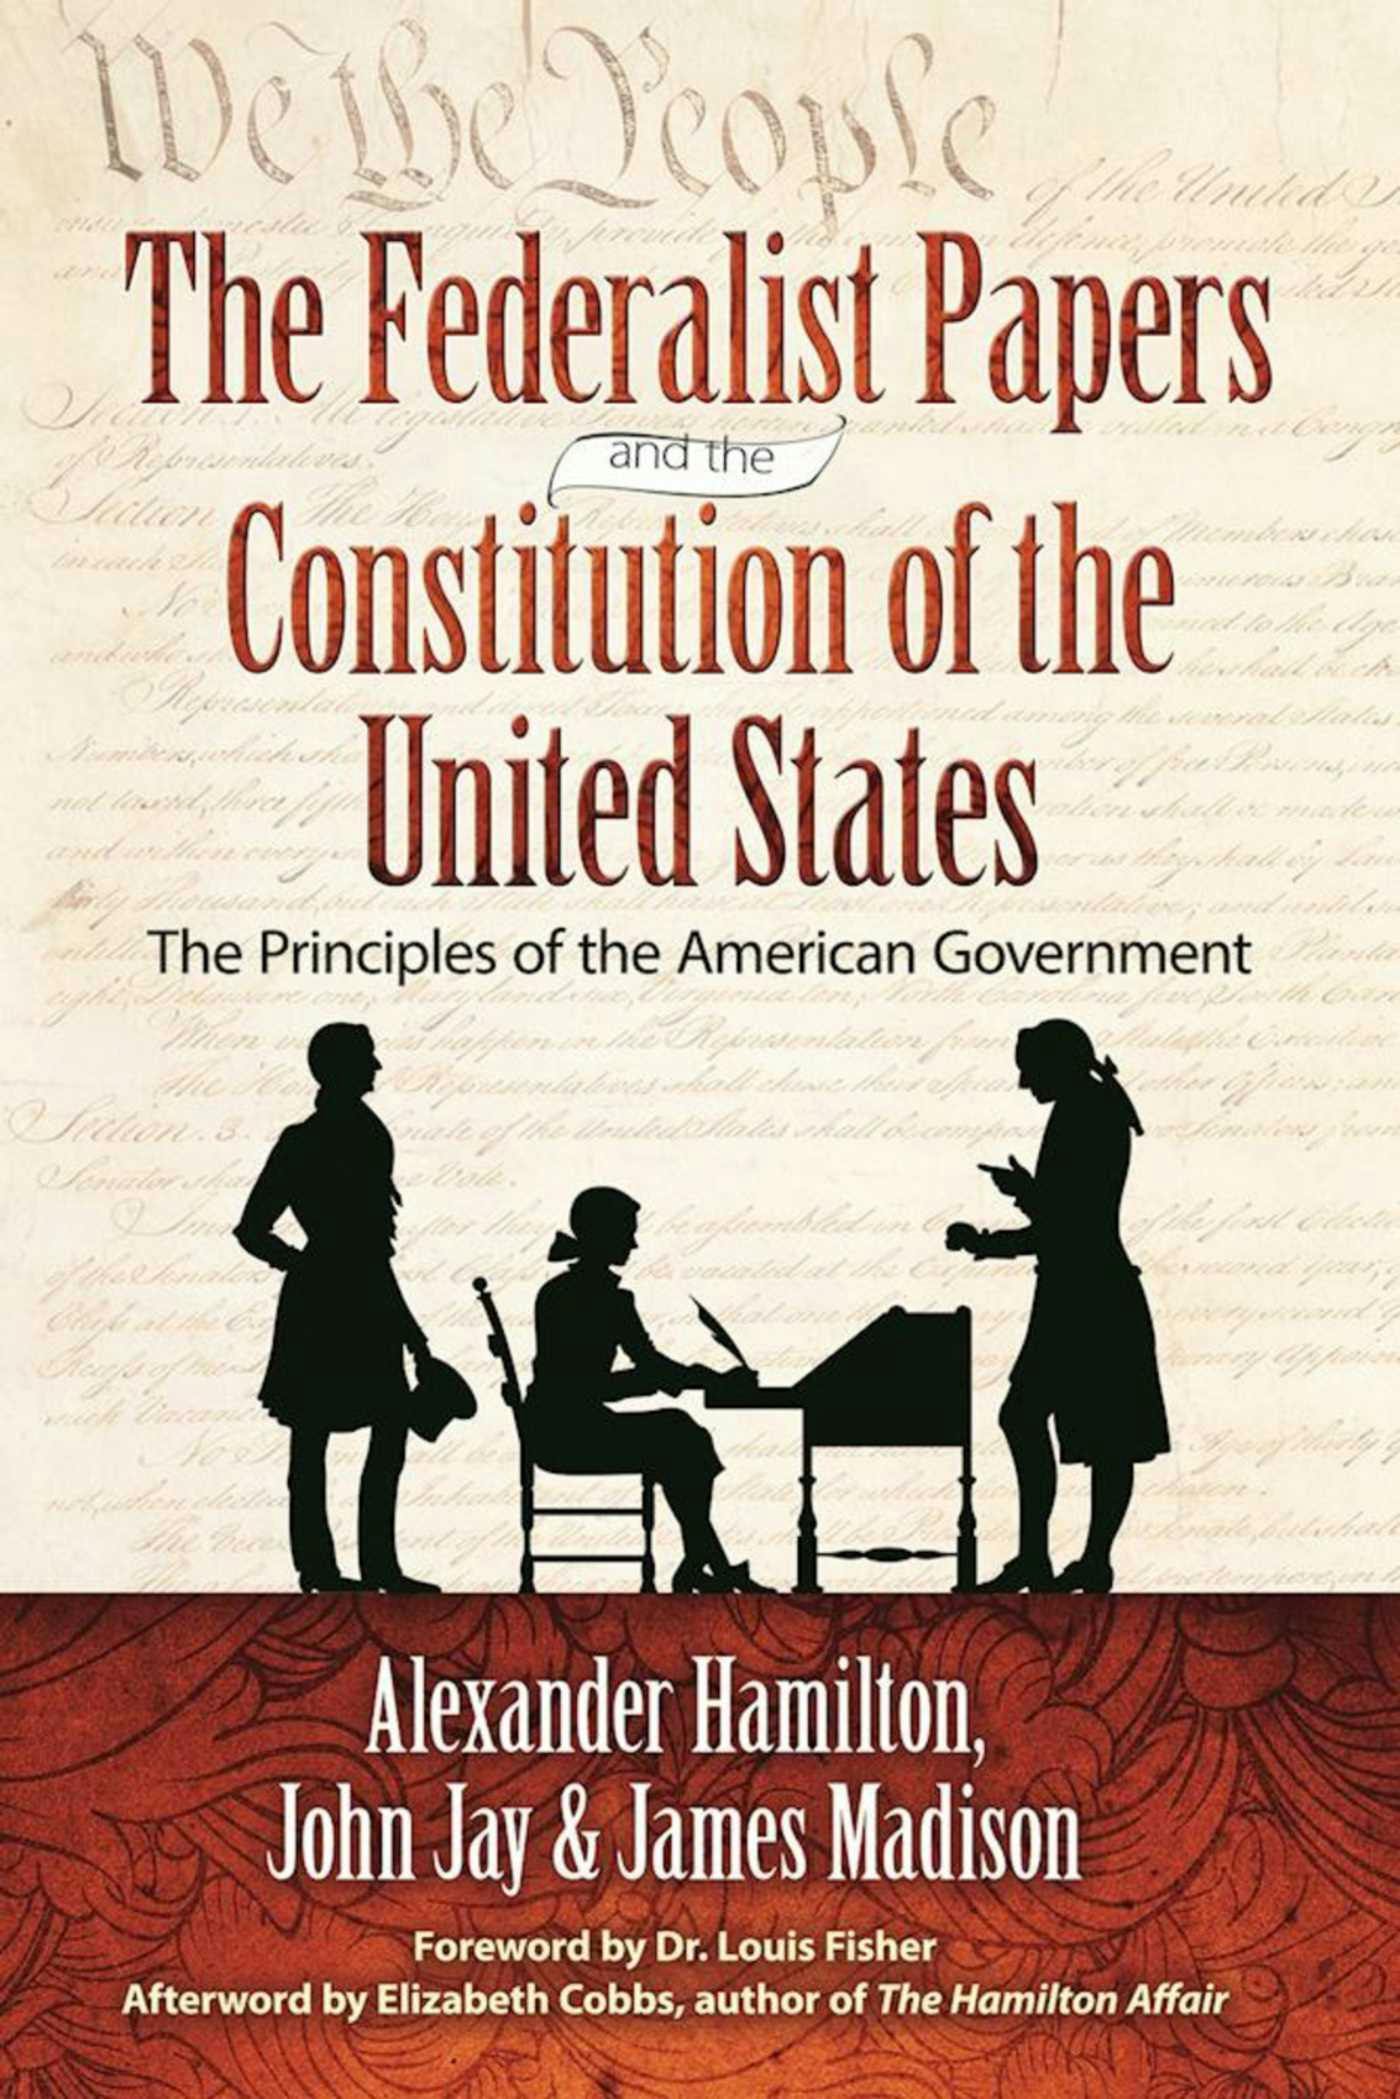 The Federalist Papers and the Constitution of the United States: The Principles of the American Government - James Madison, Alexander Hamilton, John Jay